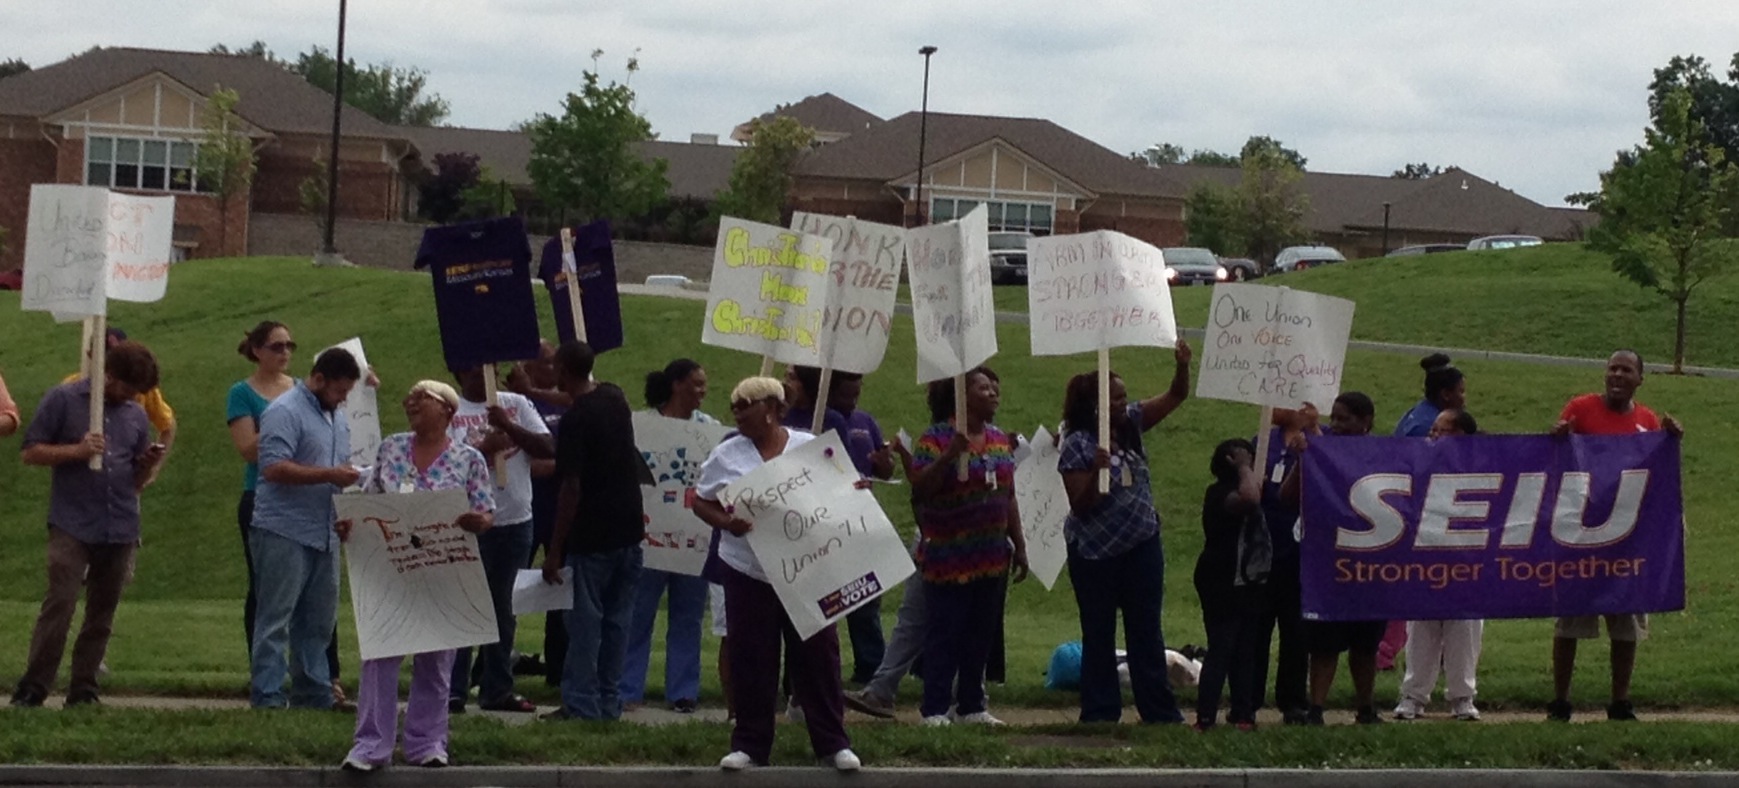 Christian Care Picket